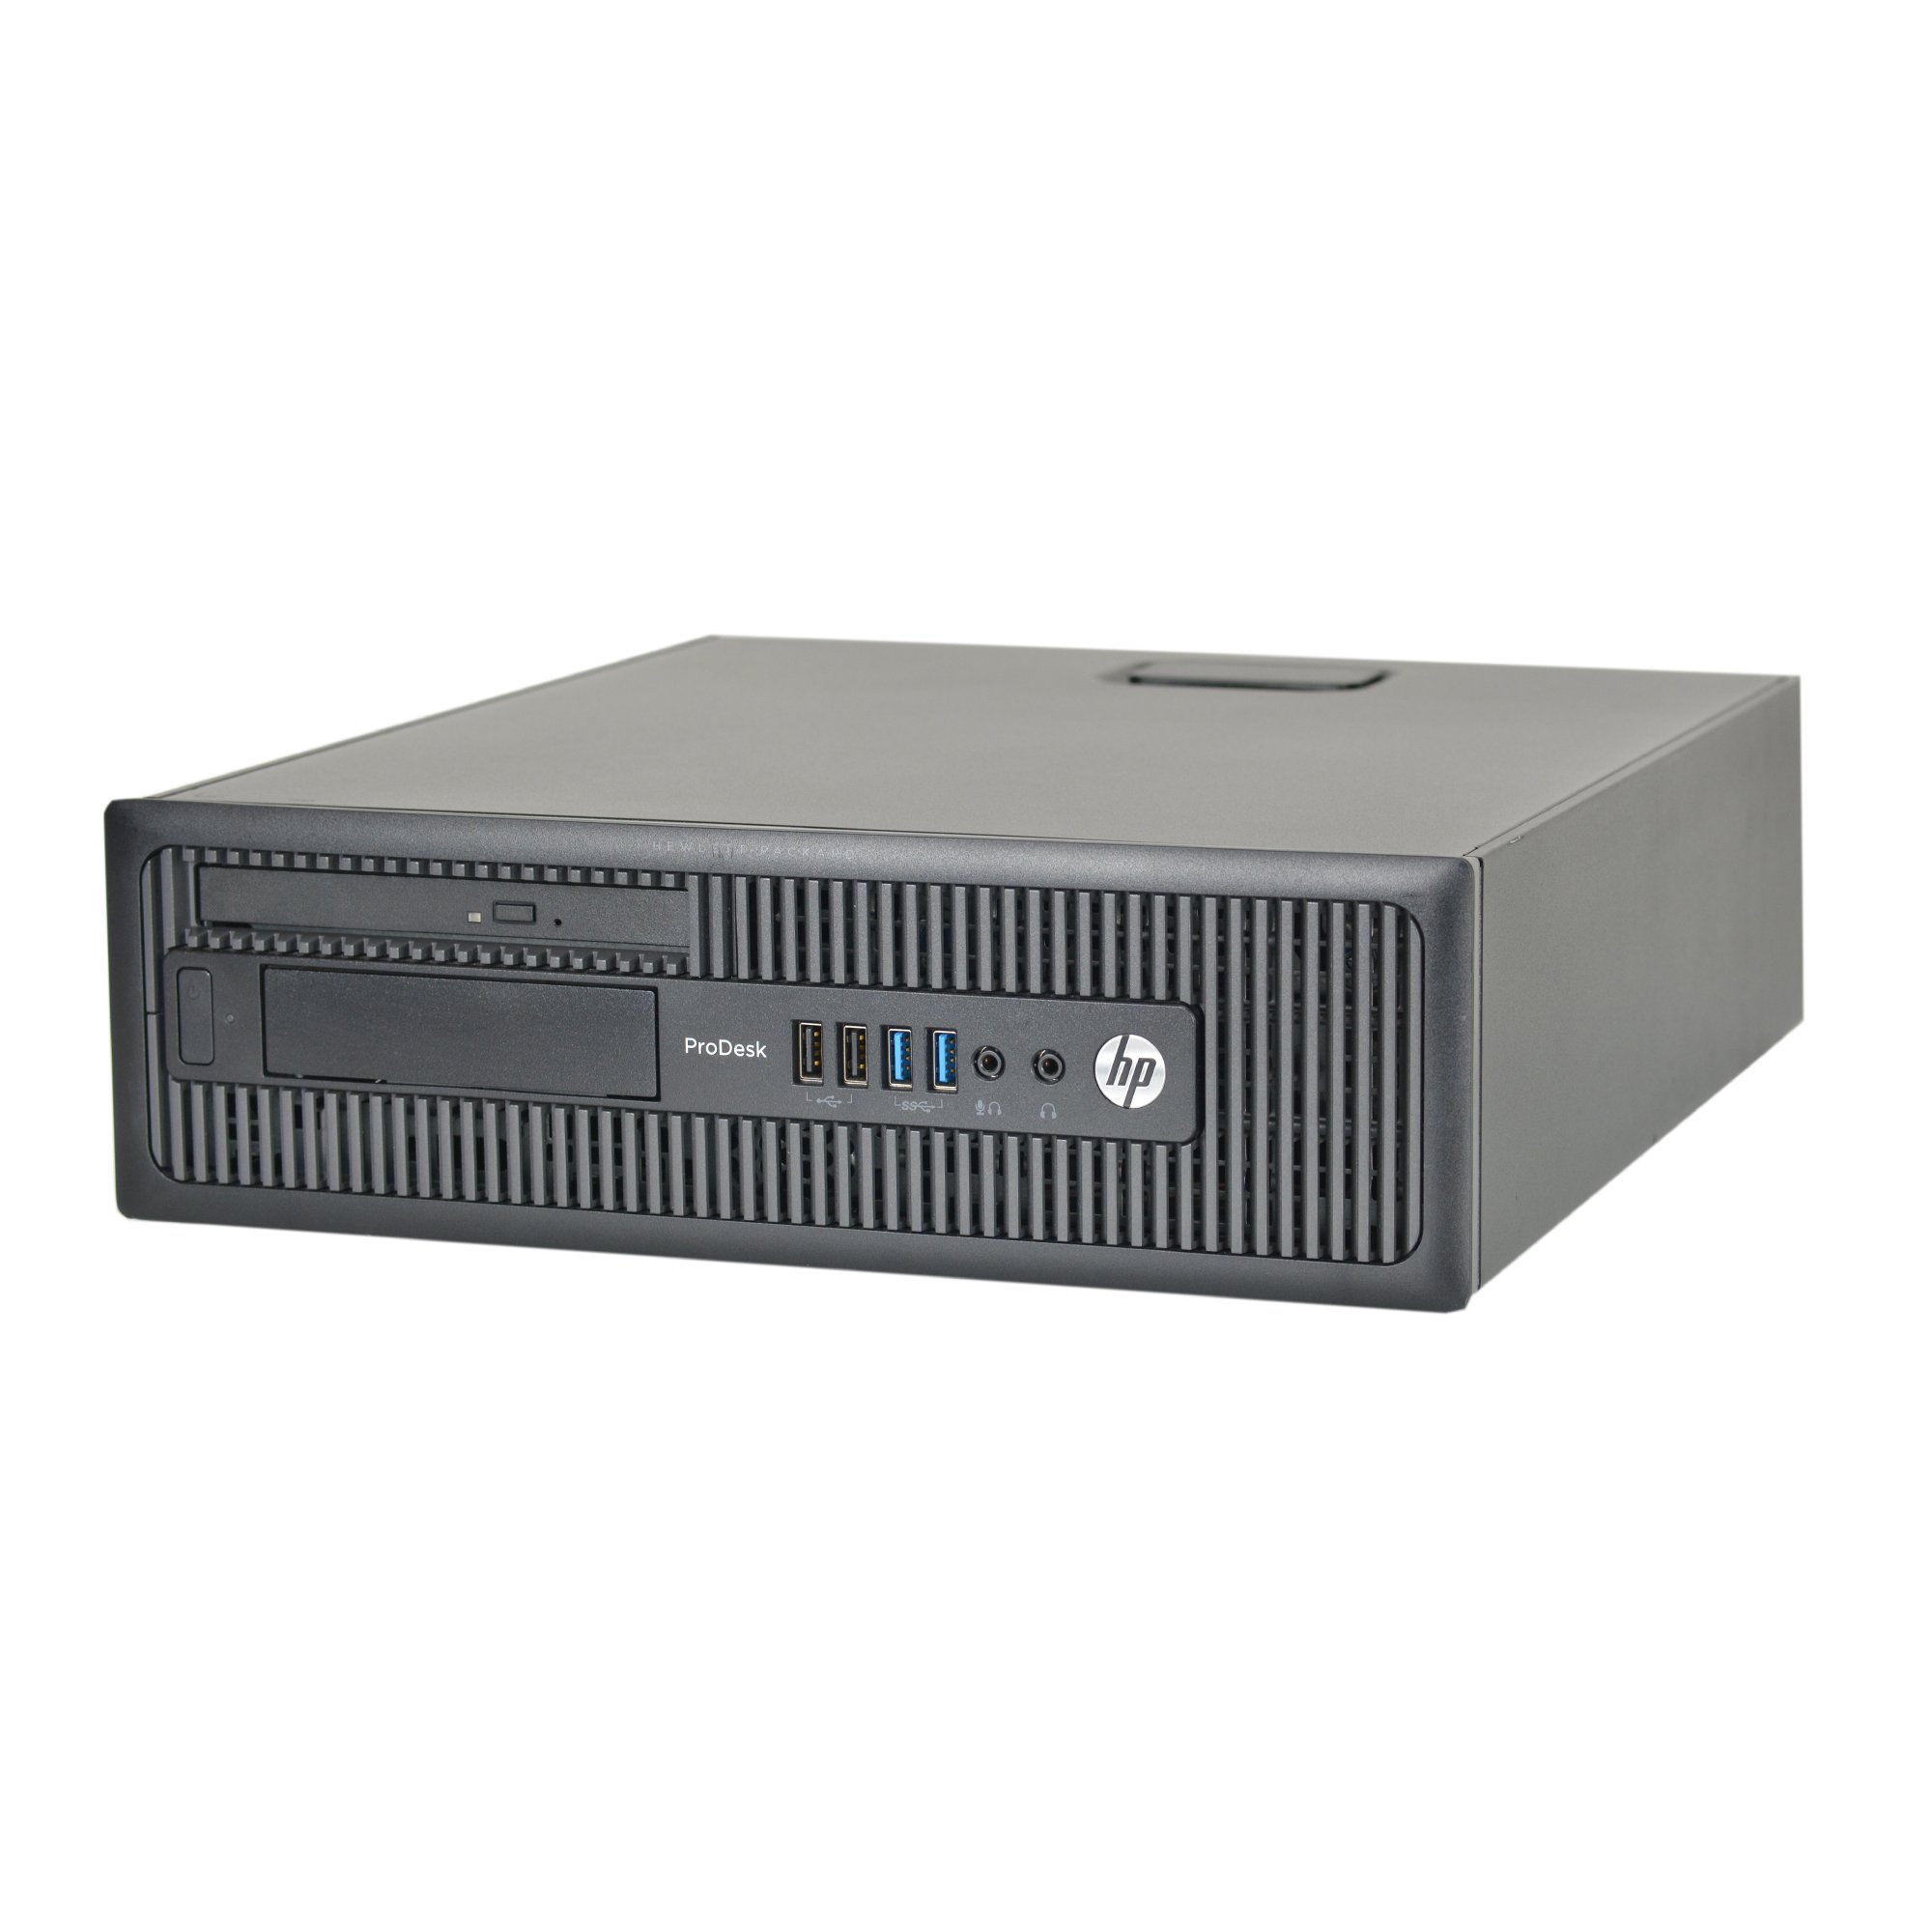 ProDesk 400 G1 Base Small Form Factor PC